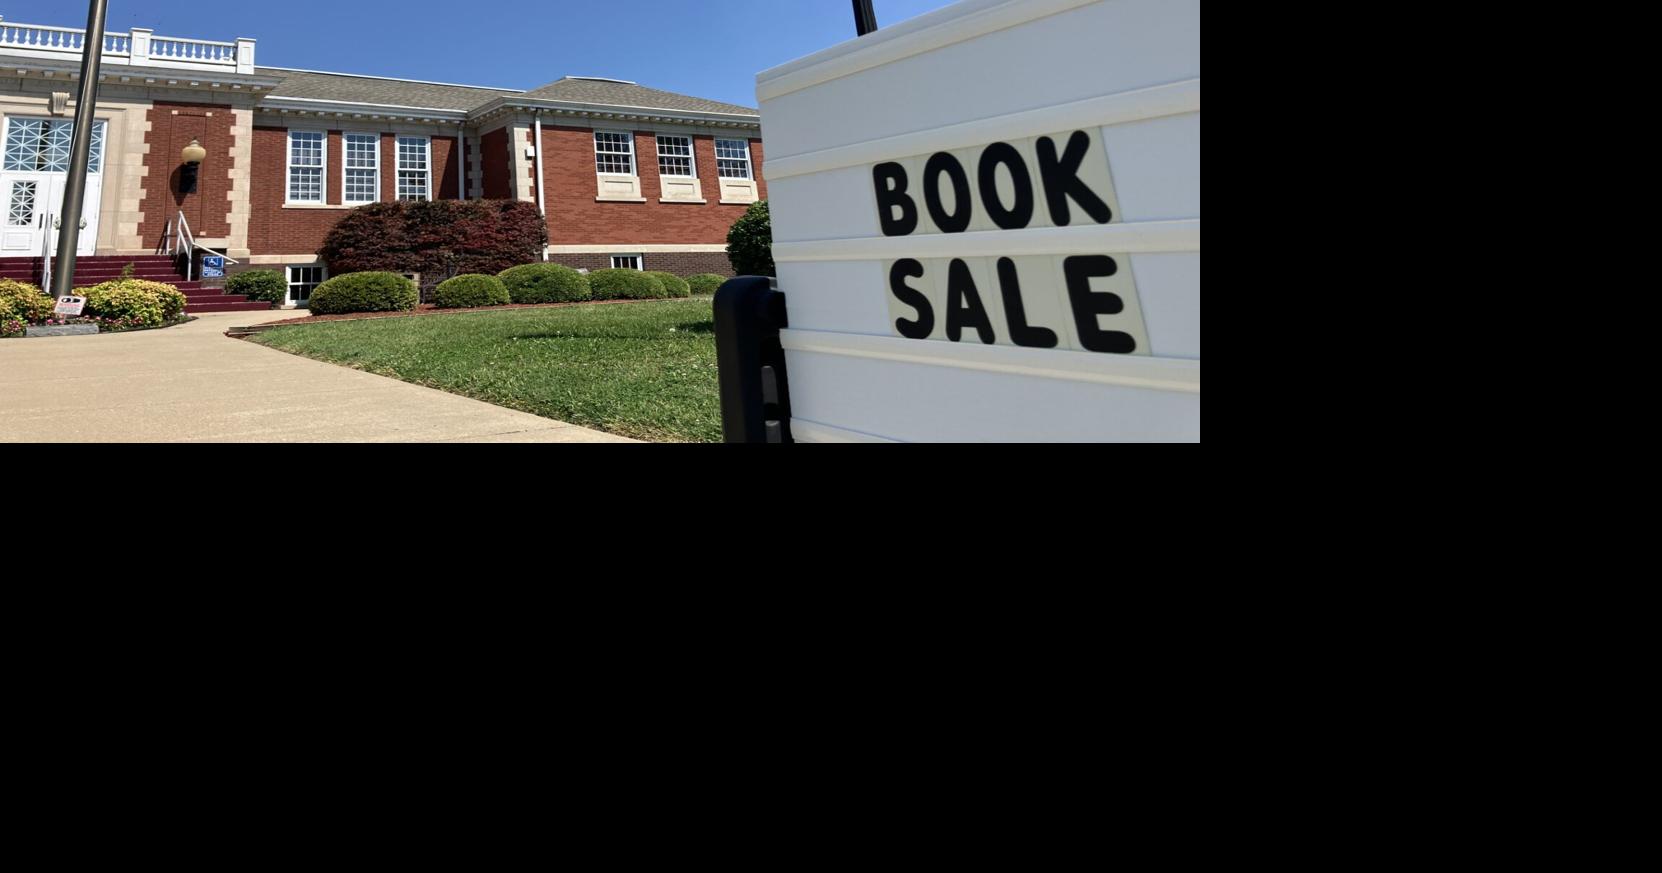 Metropolis Public Library book sale marks a return to normality | News